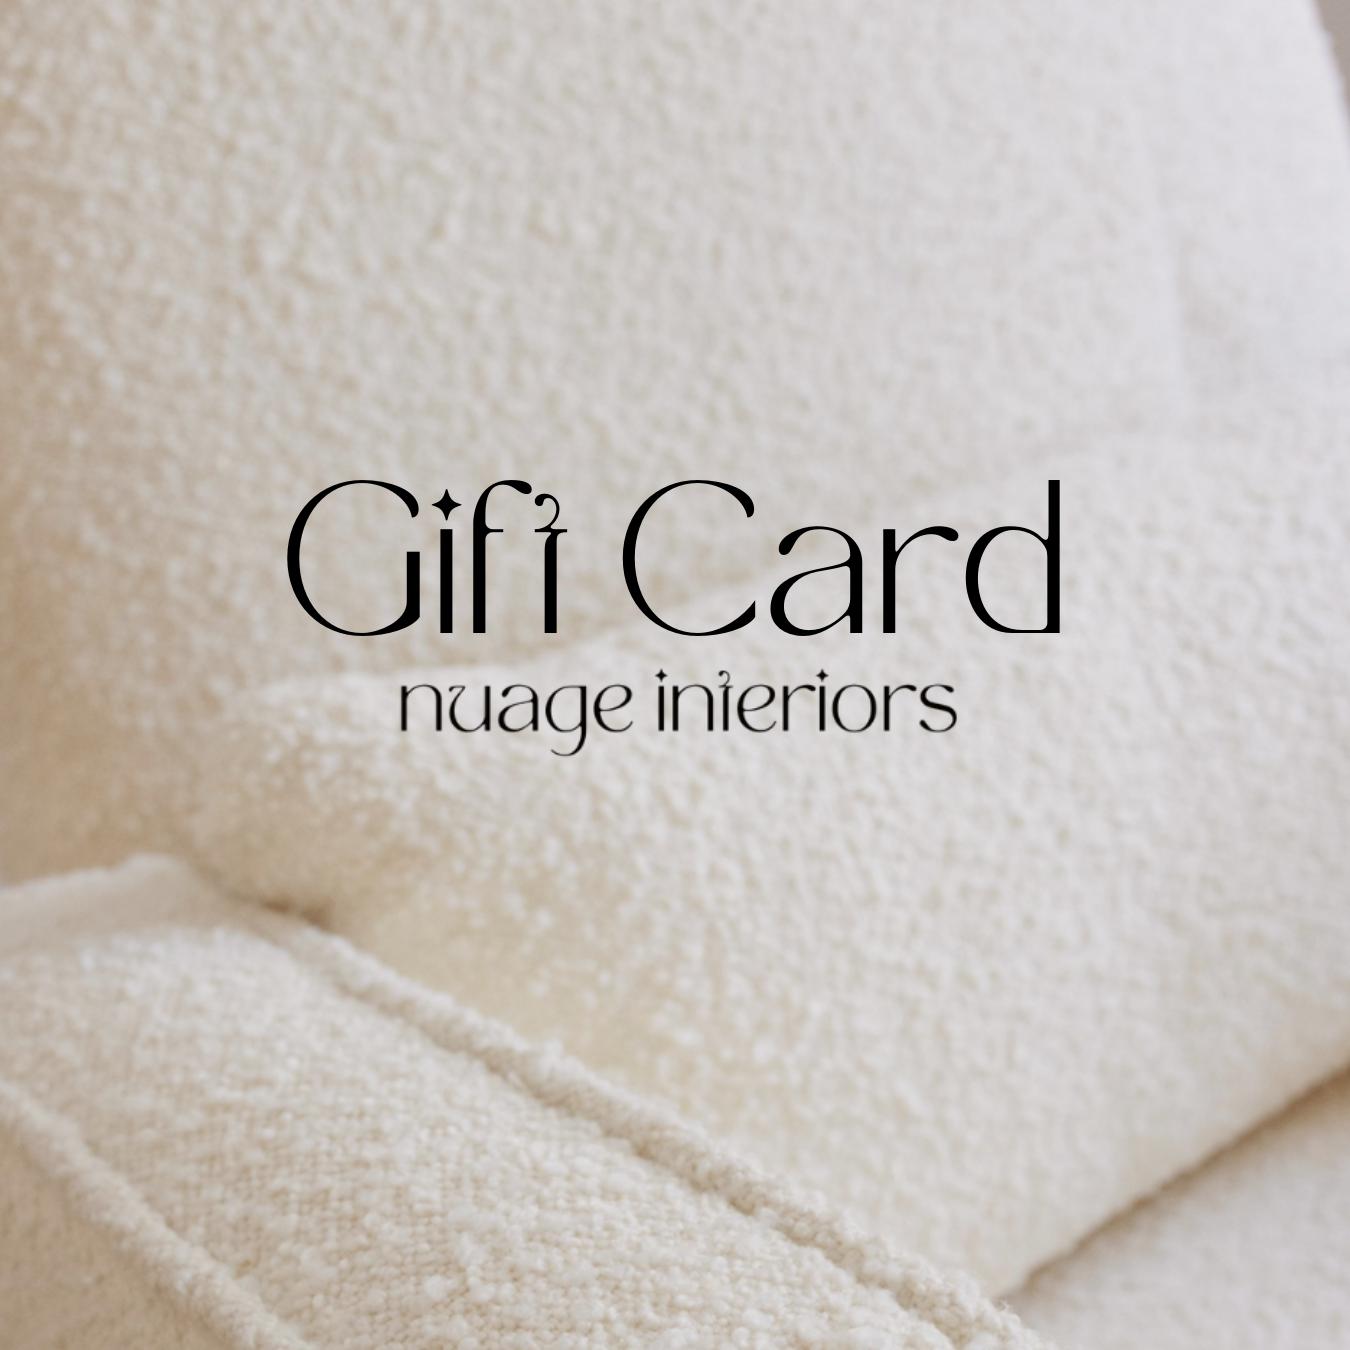 Nuage Interiors Gift Cards